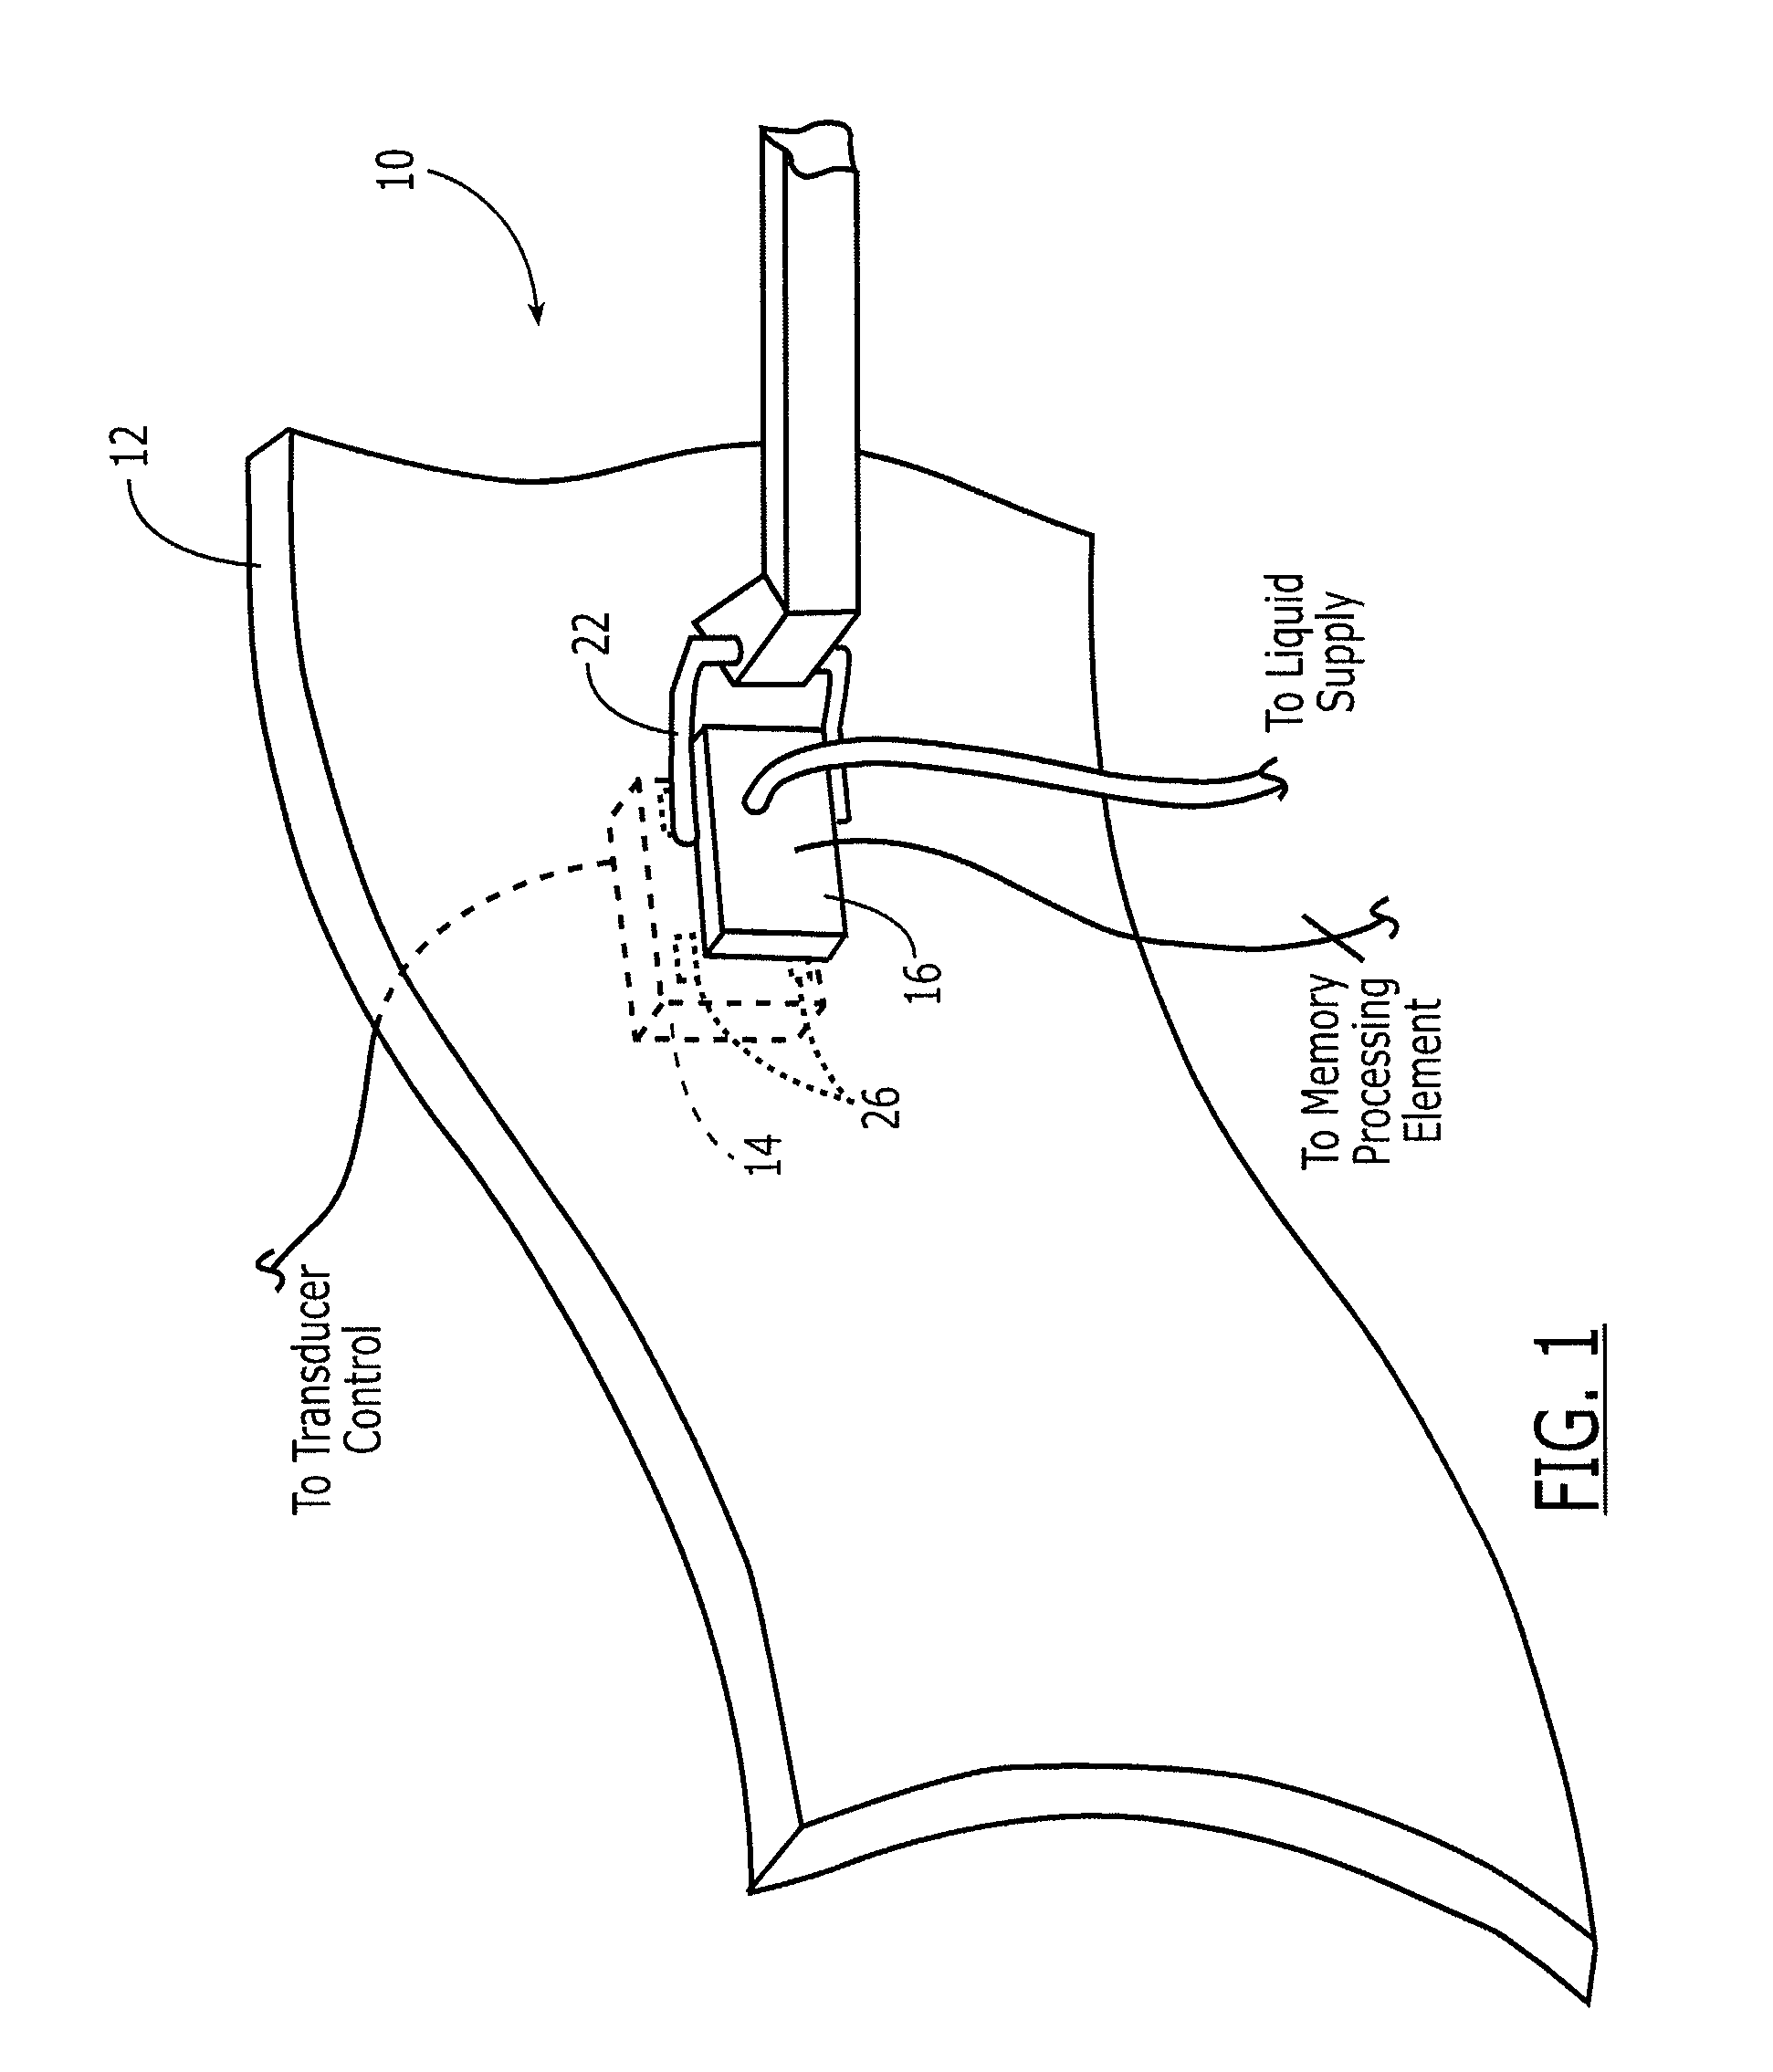 Hybrid Inspection System And Method Employing Both Air-Coupled And Liquid-Coupled Transducers